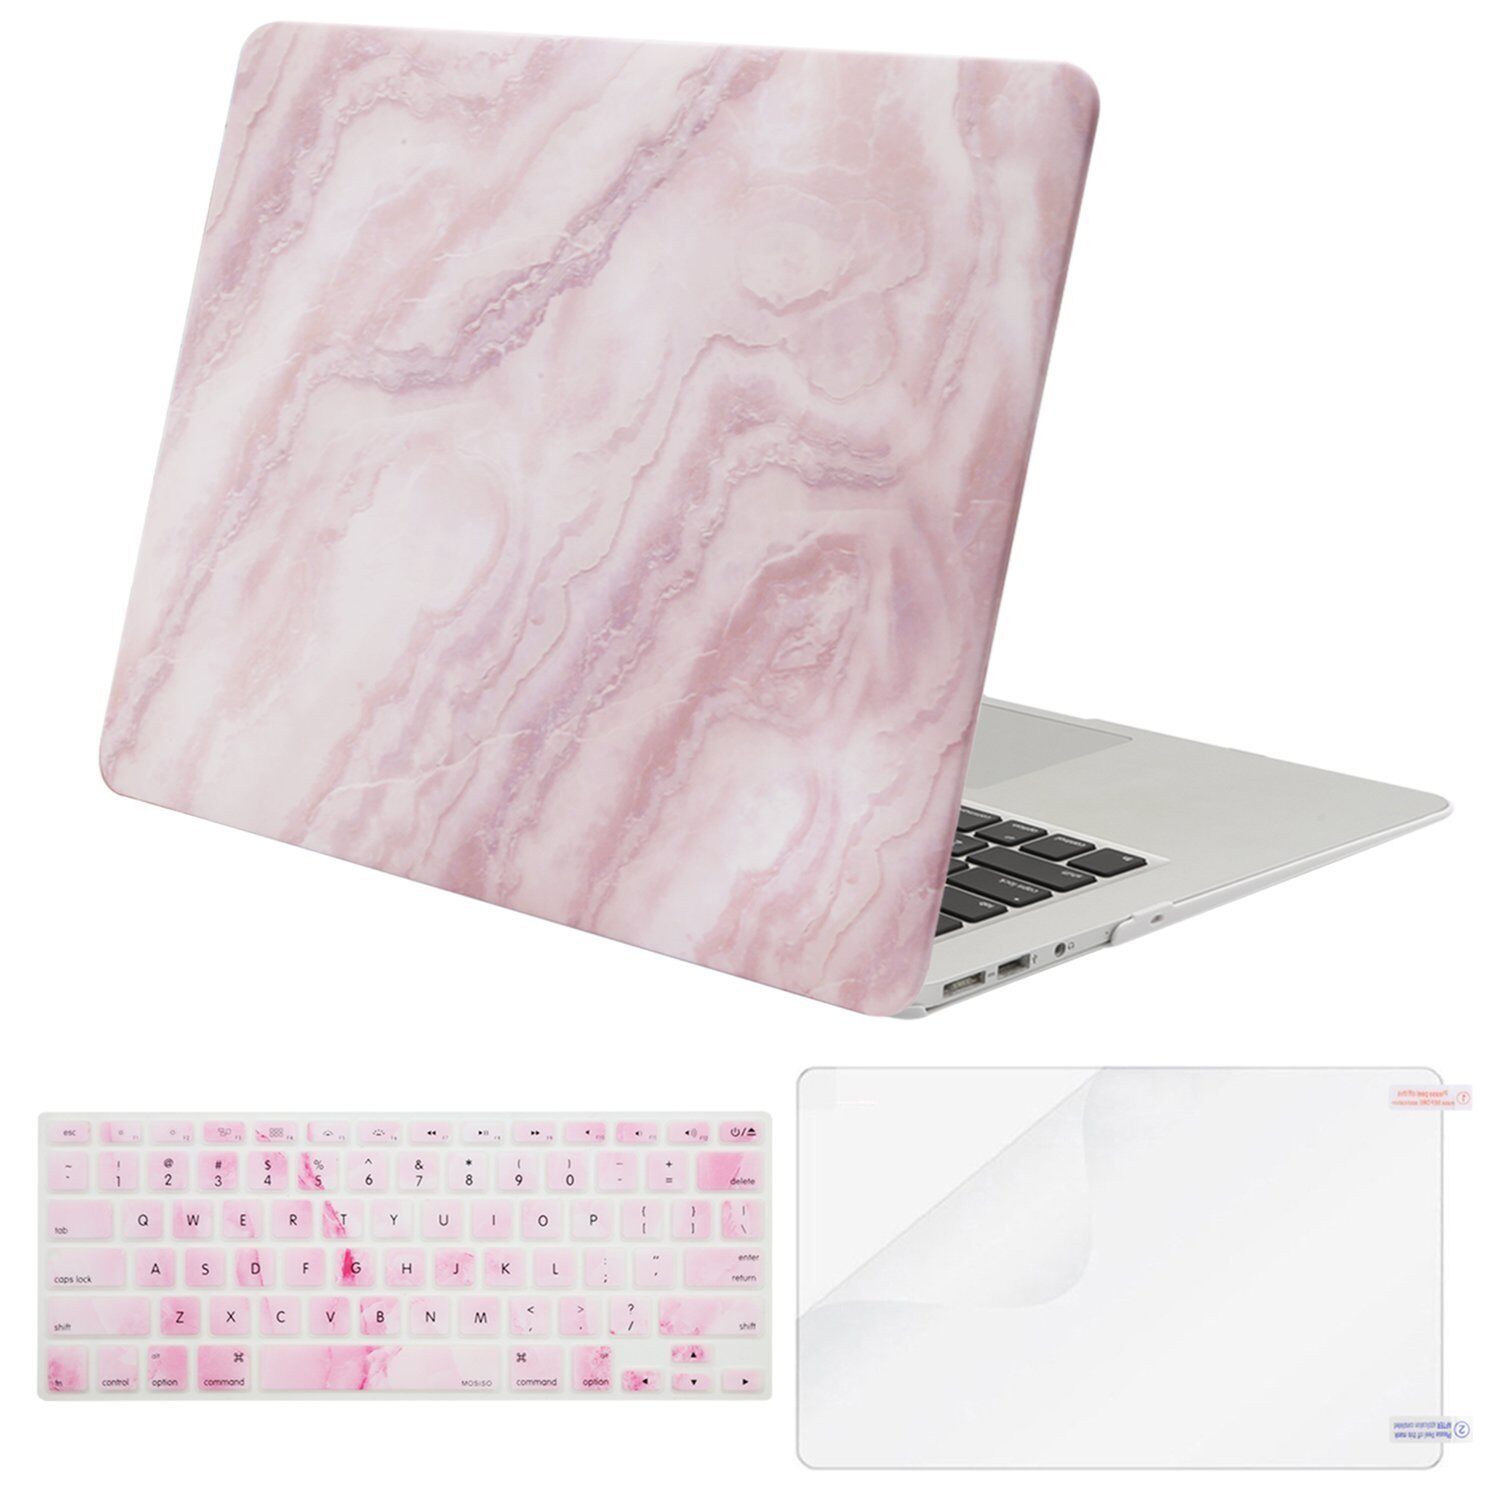 Mosiso Laptop Marble Pattern Case for MacBook Air 11 inch Model A1370/A1465 